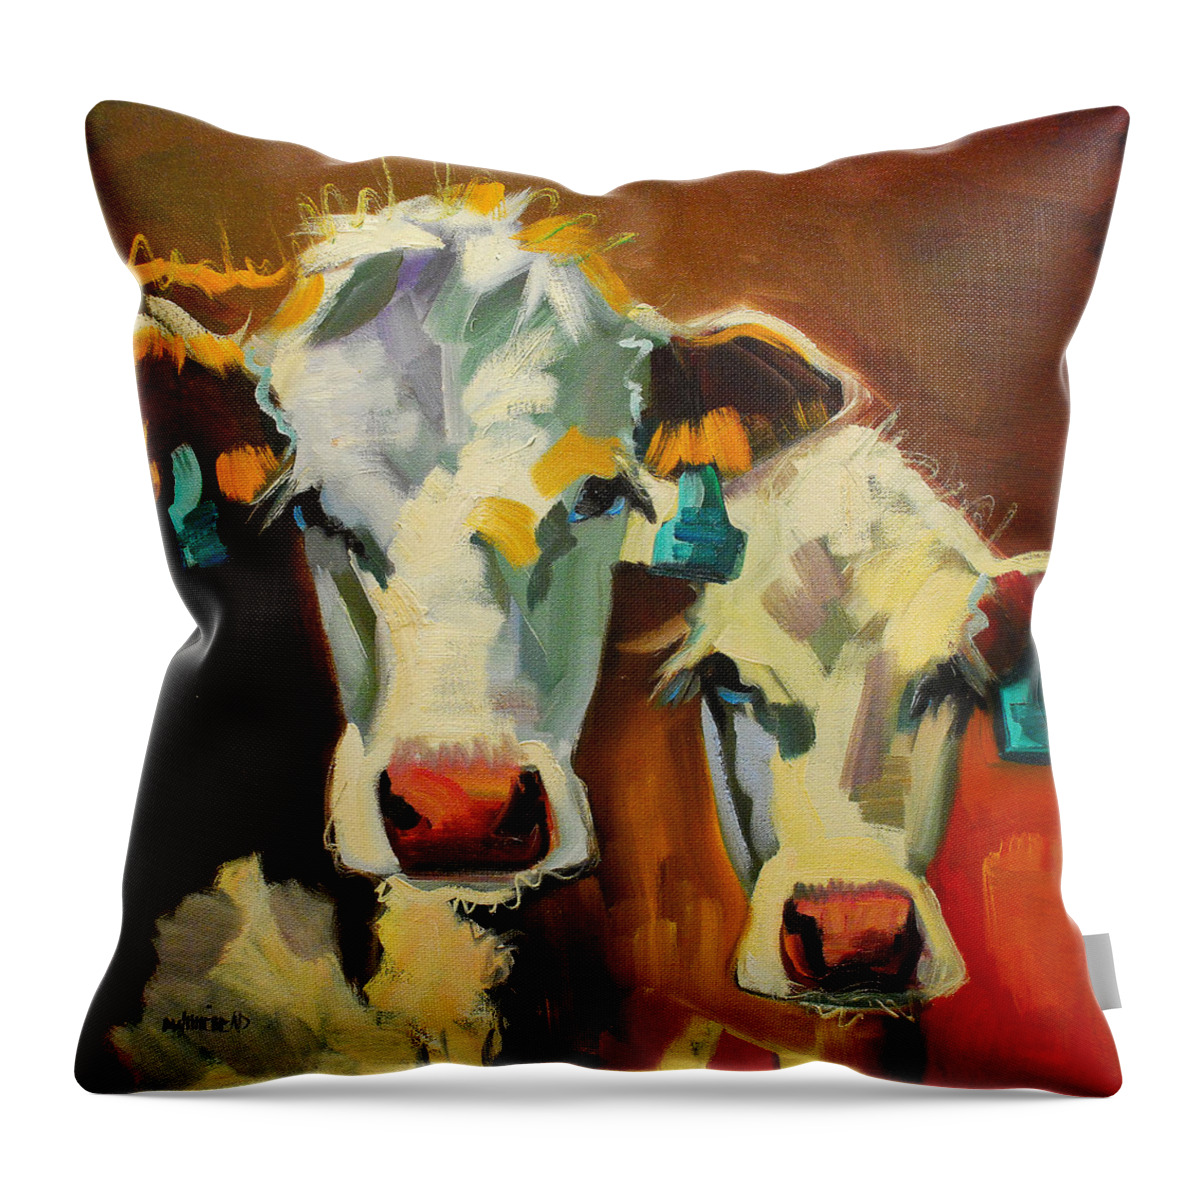 Cow Throw Pillow featuring the painting Sibling Cows by Diane Whitehead